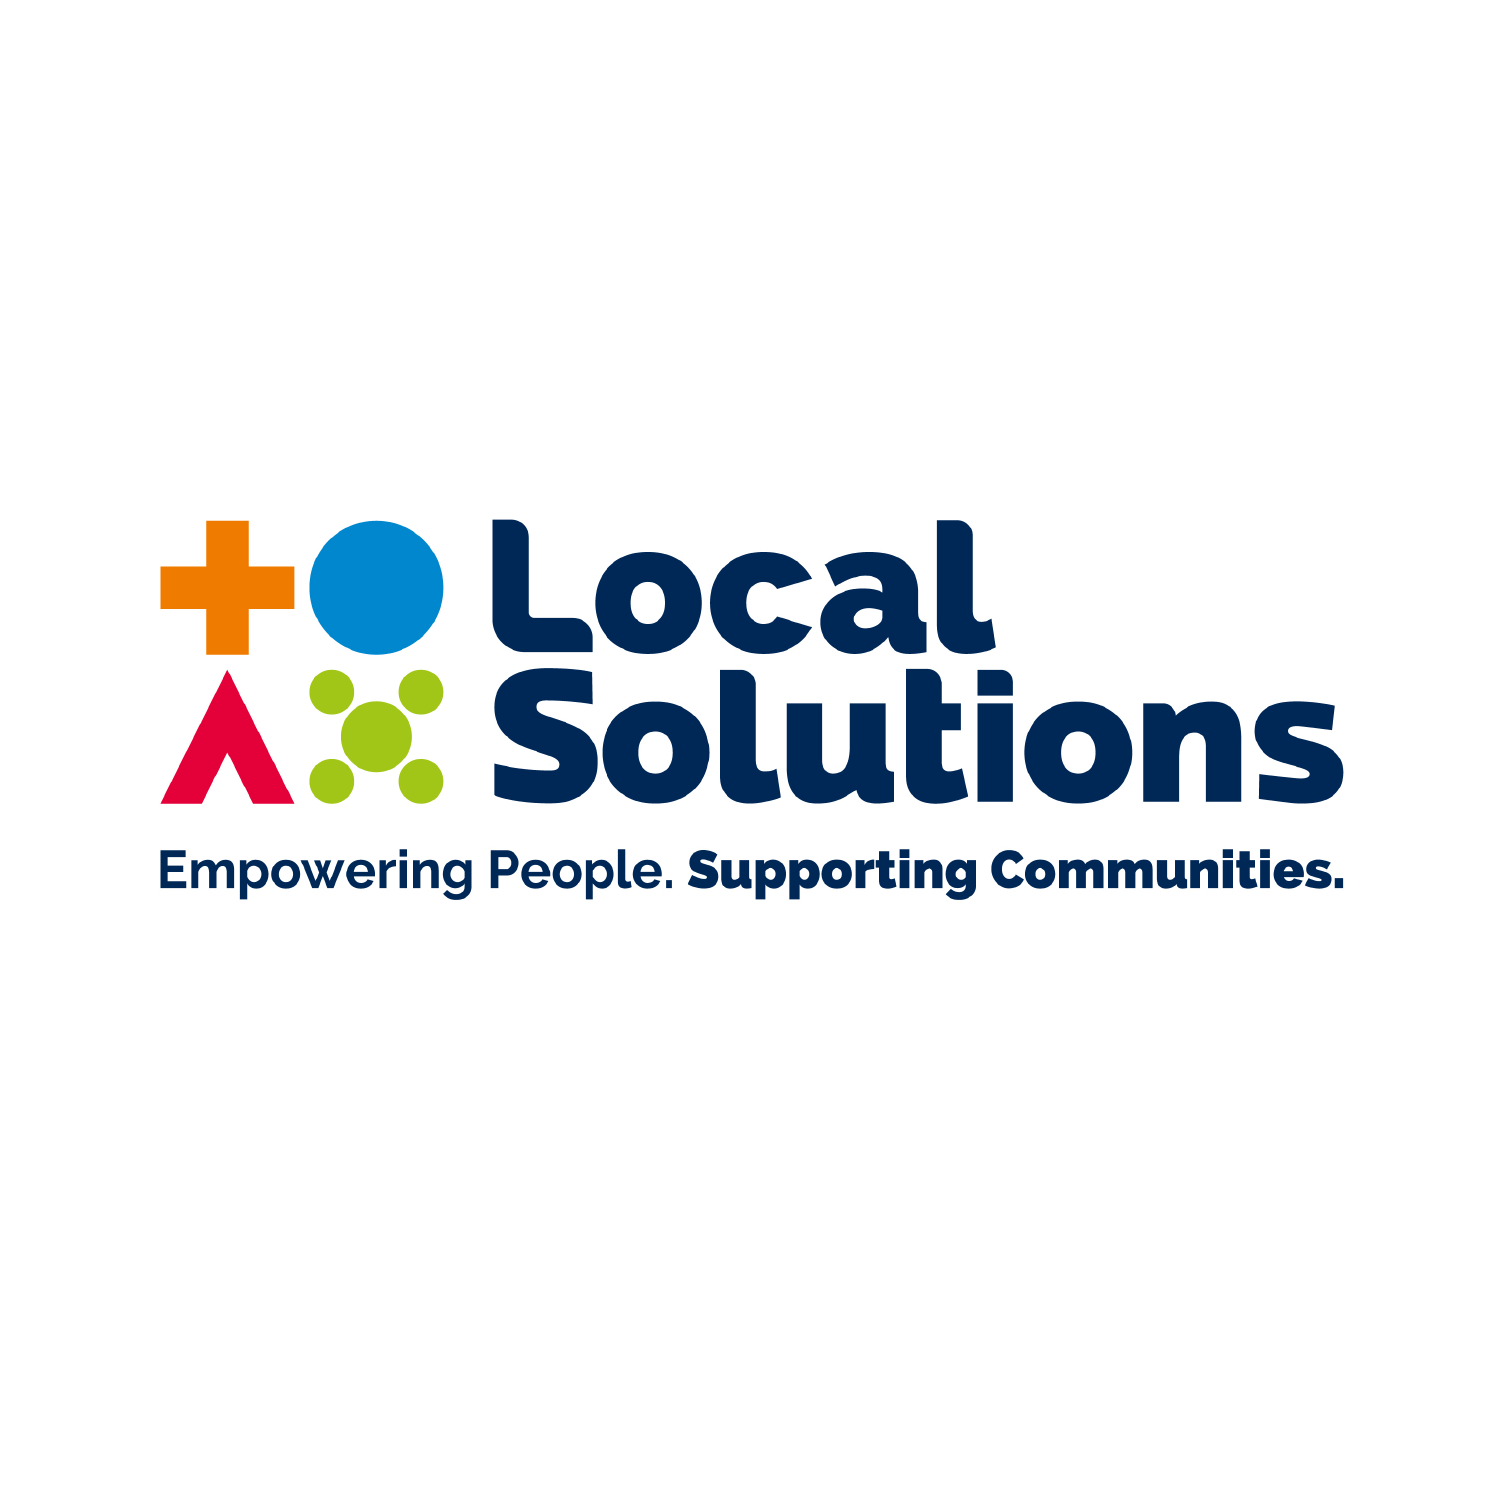 Local Solutions logo